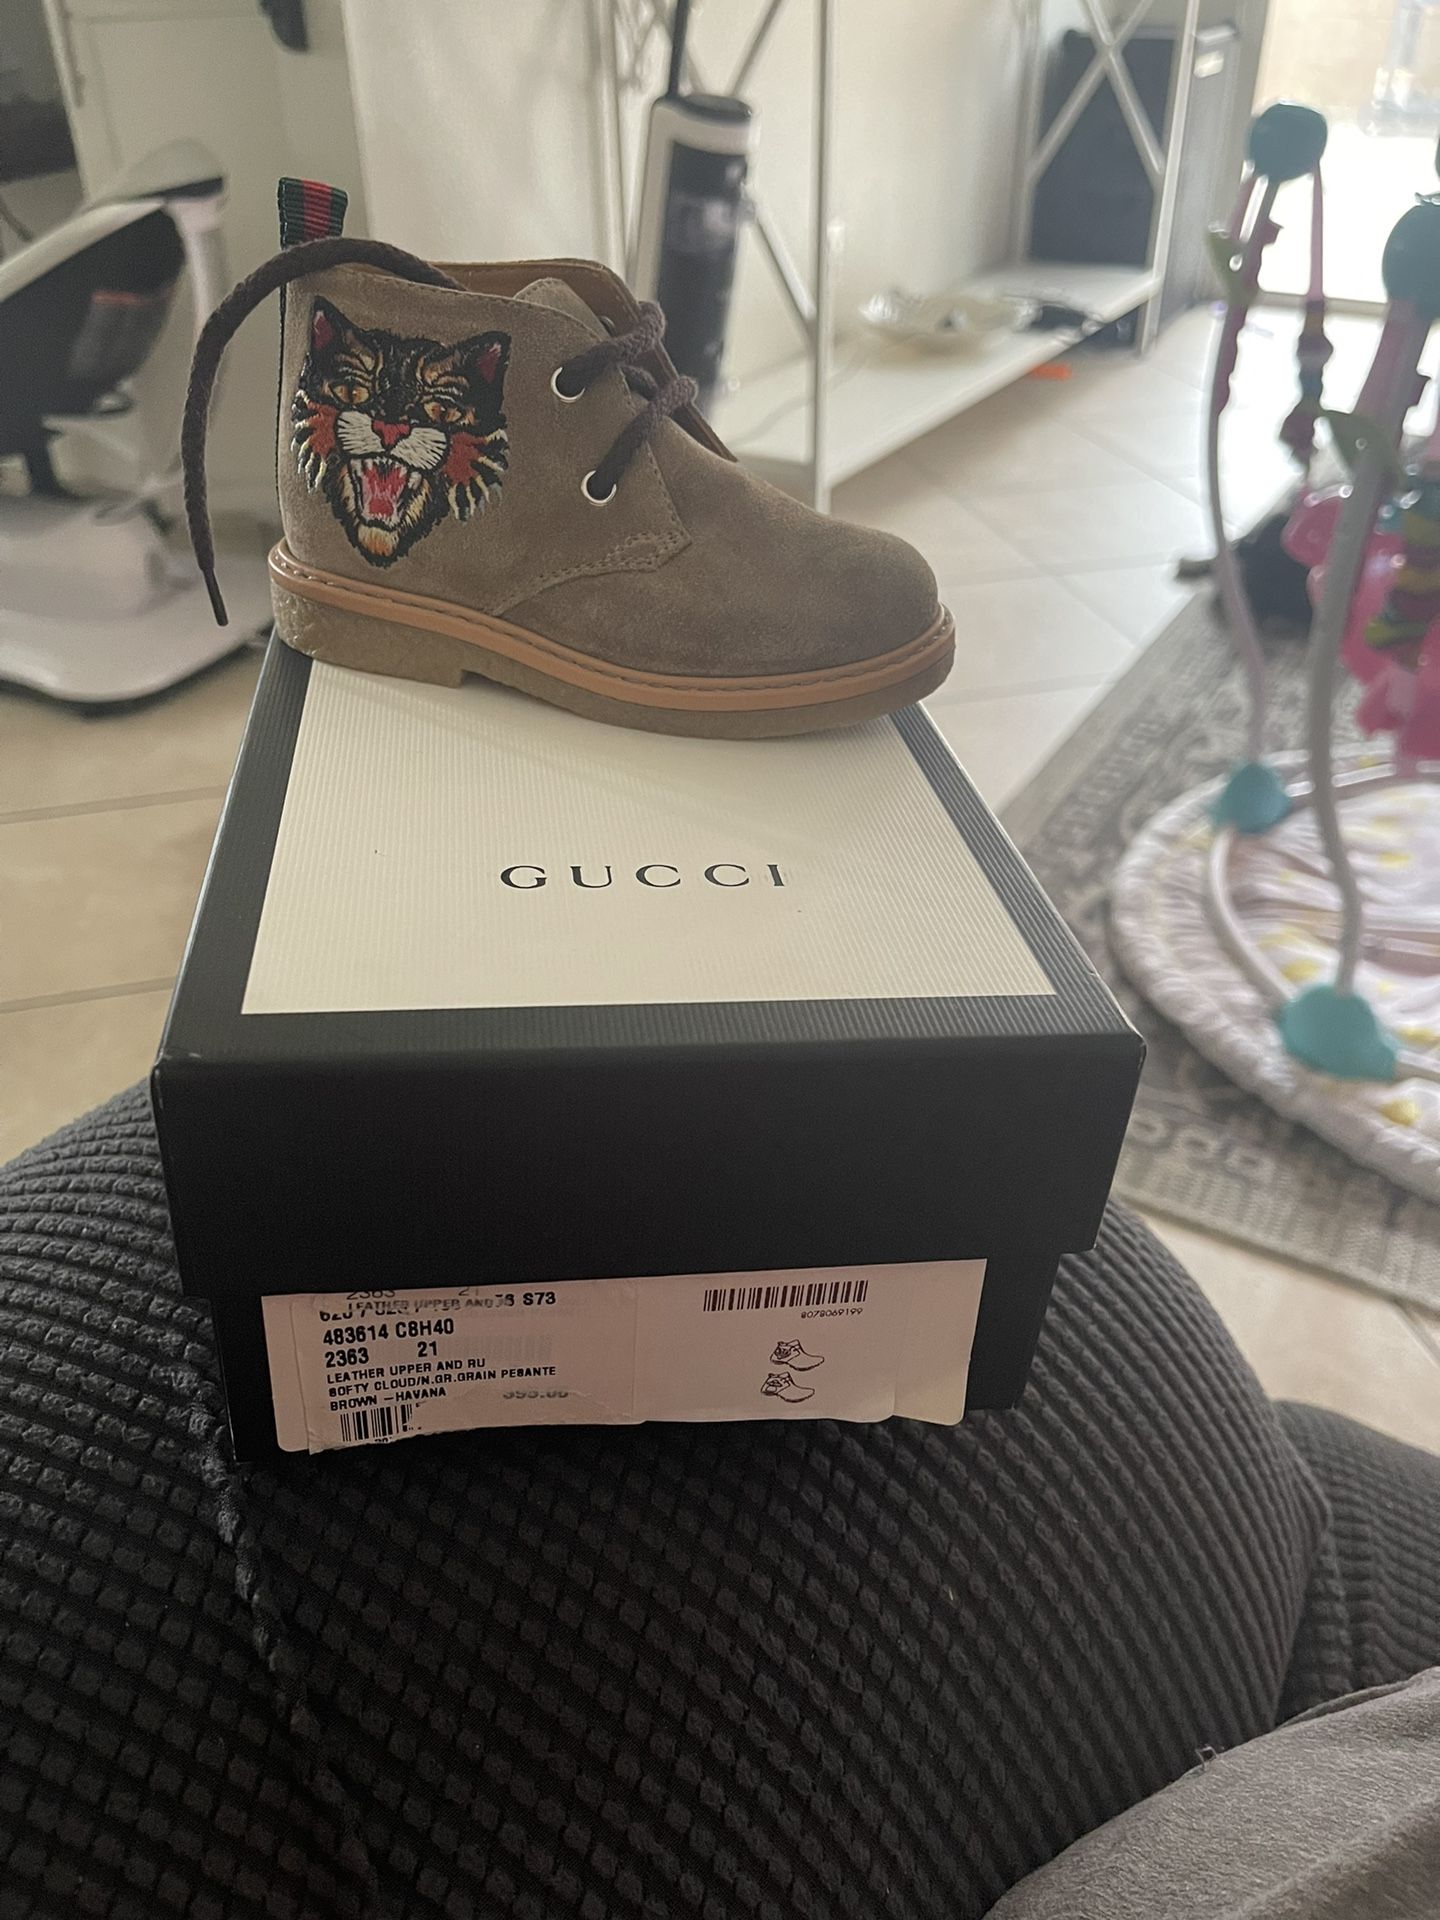 Authentic Gucci Toddler Shoes - 5